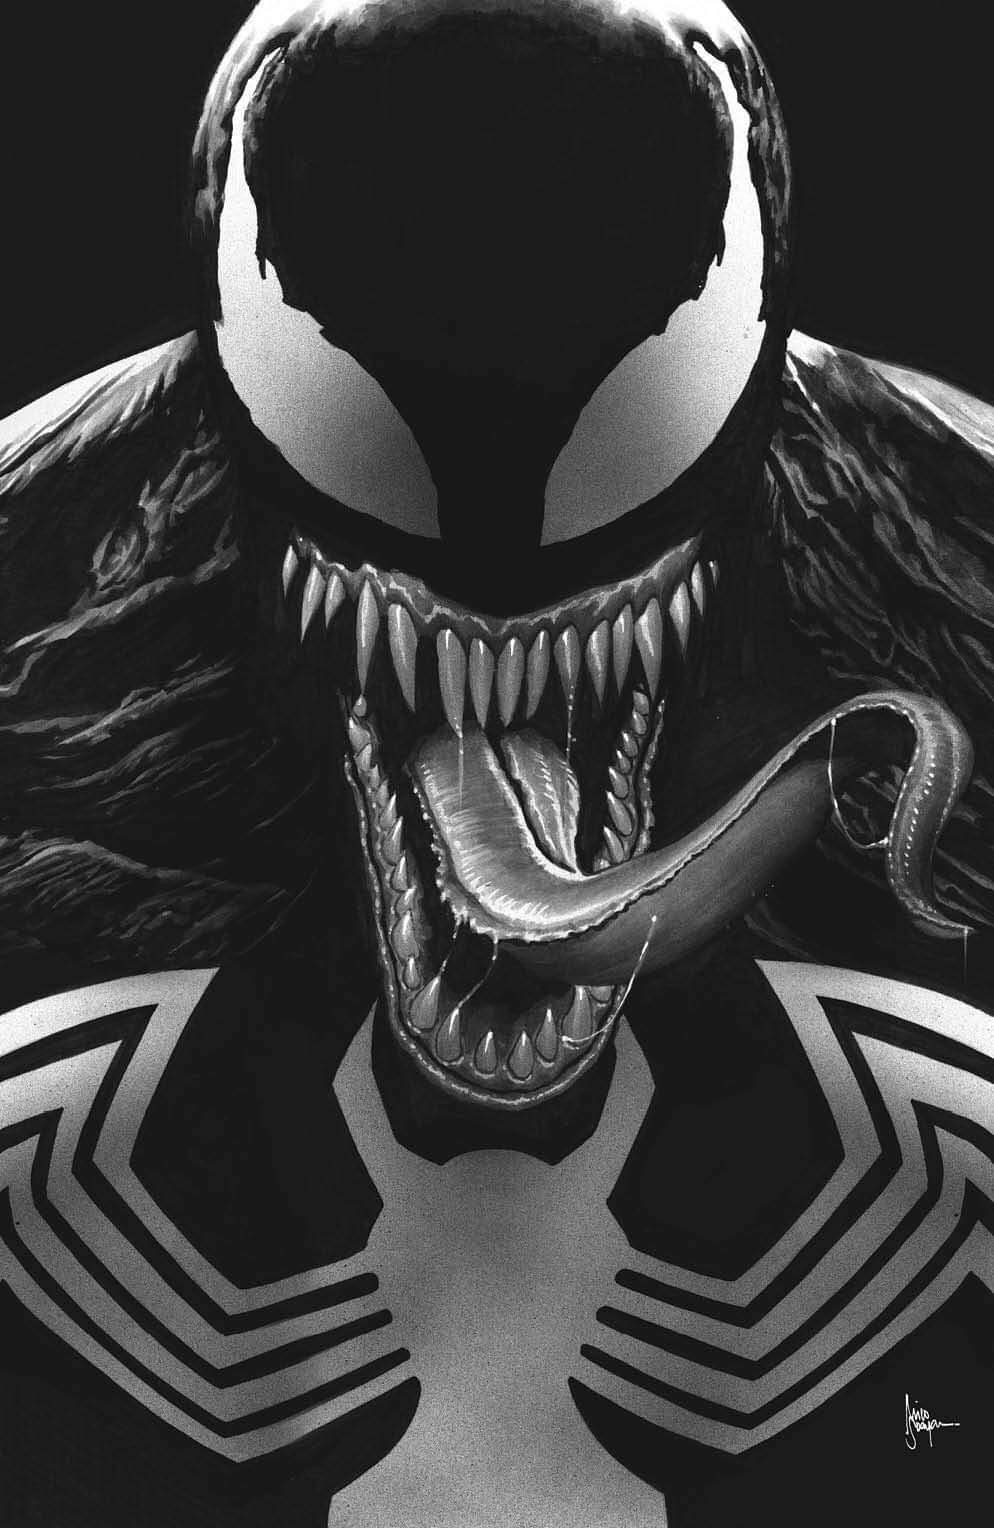 Venom Lethal Protector #1 The 616 Comics Mico Suayan Exclusive Full Art Black & White Variant Cover